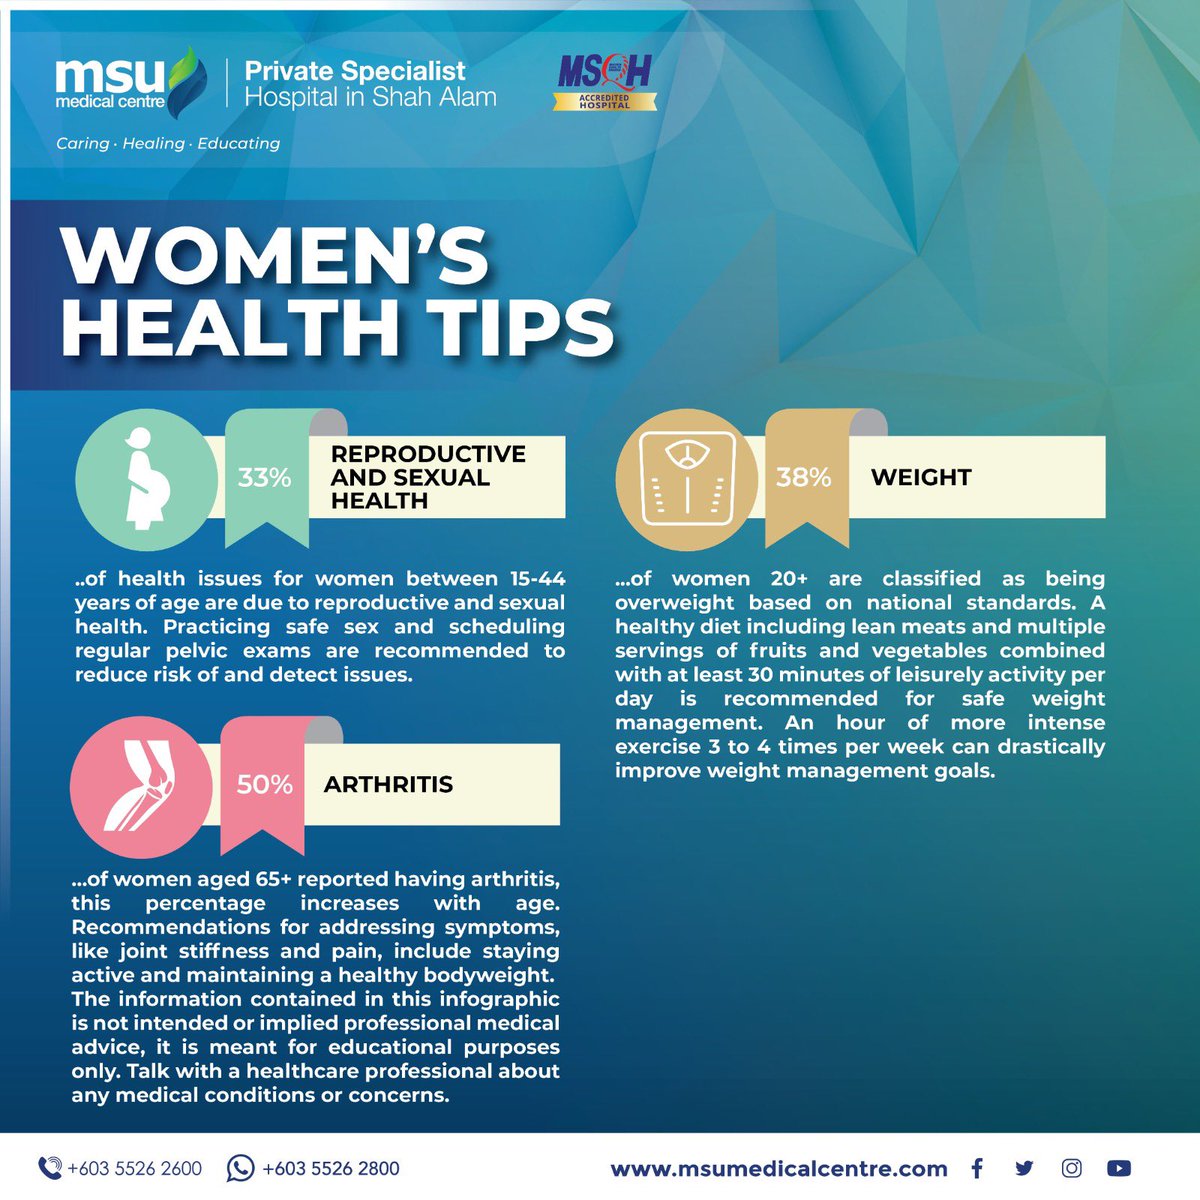 There are several factors to consider while thinking about the health of women.

Regardless of your age, making the right lifestyle decisions can significantly reduce your health risks and enable you to have the life you want.

#CaringHealingEducating 
#MSUMC 
#womenwellness